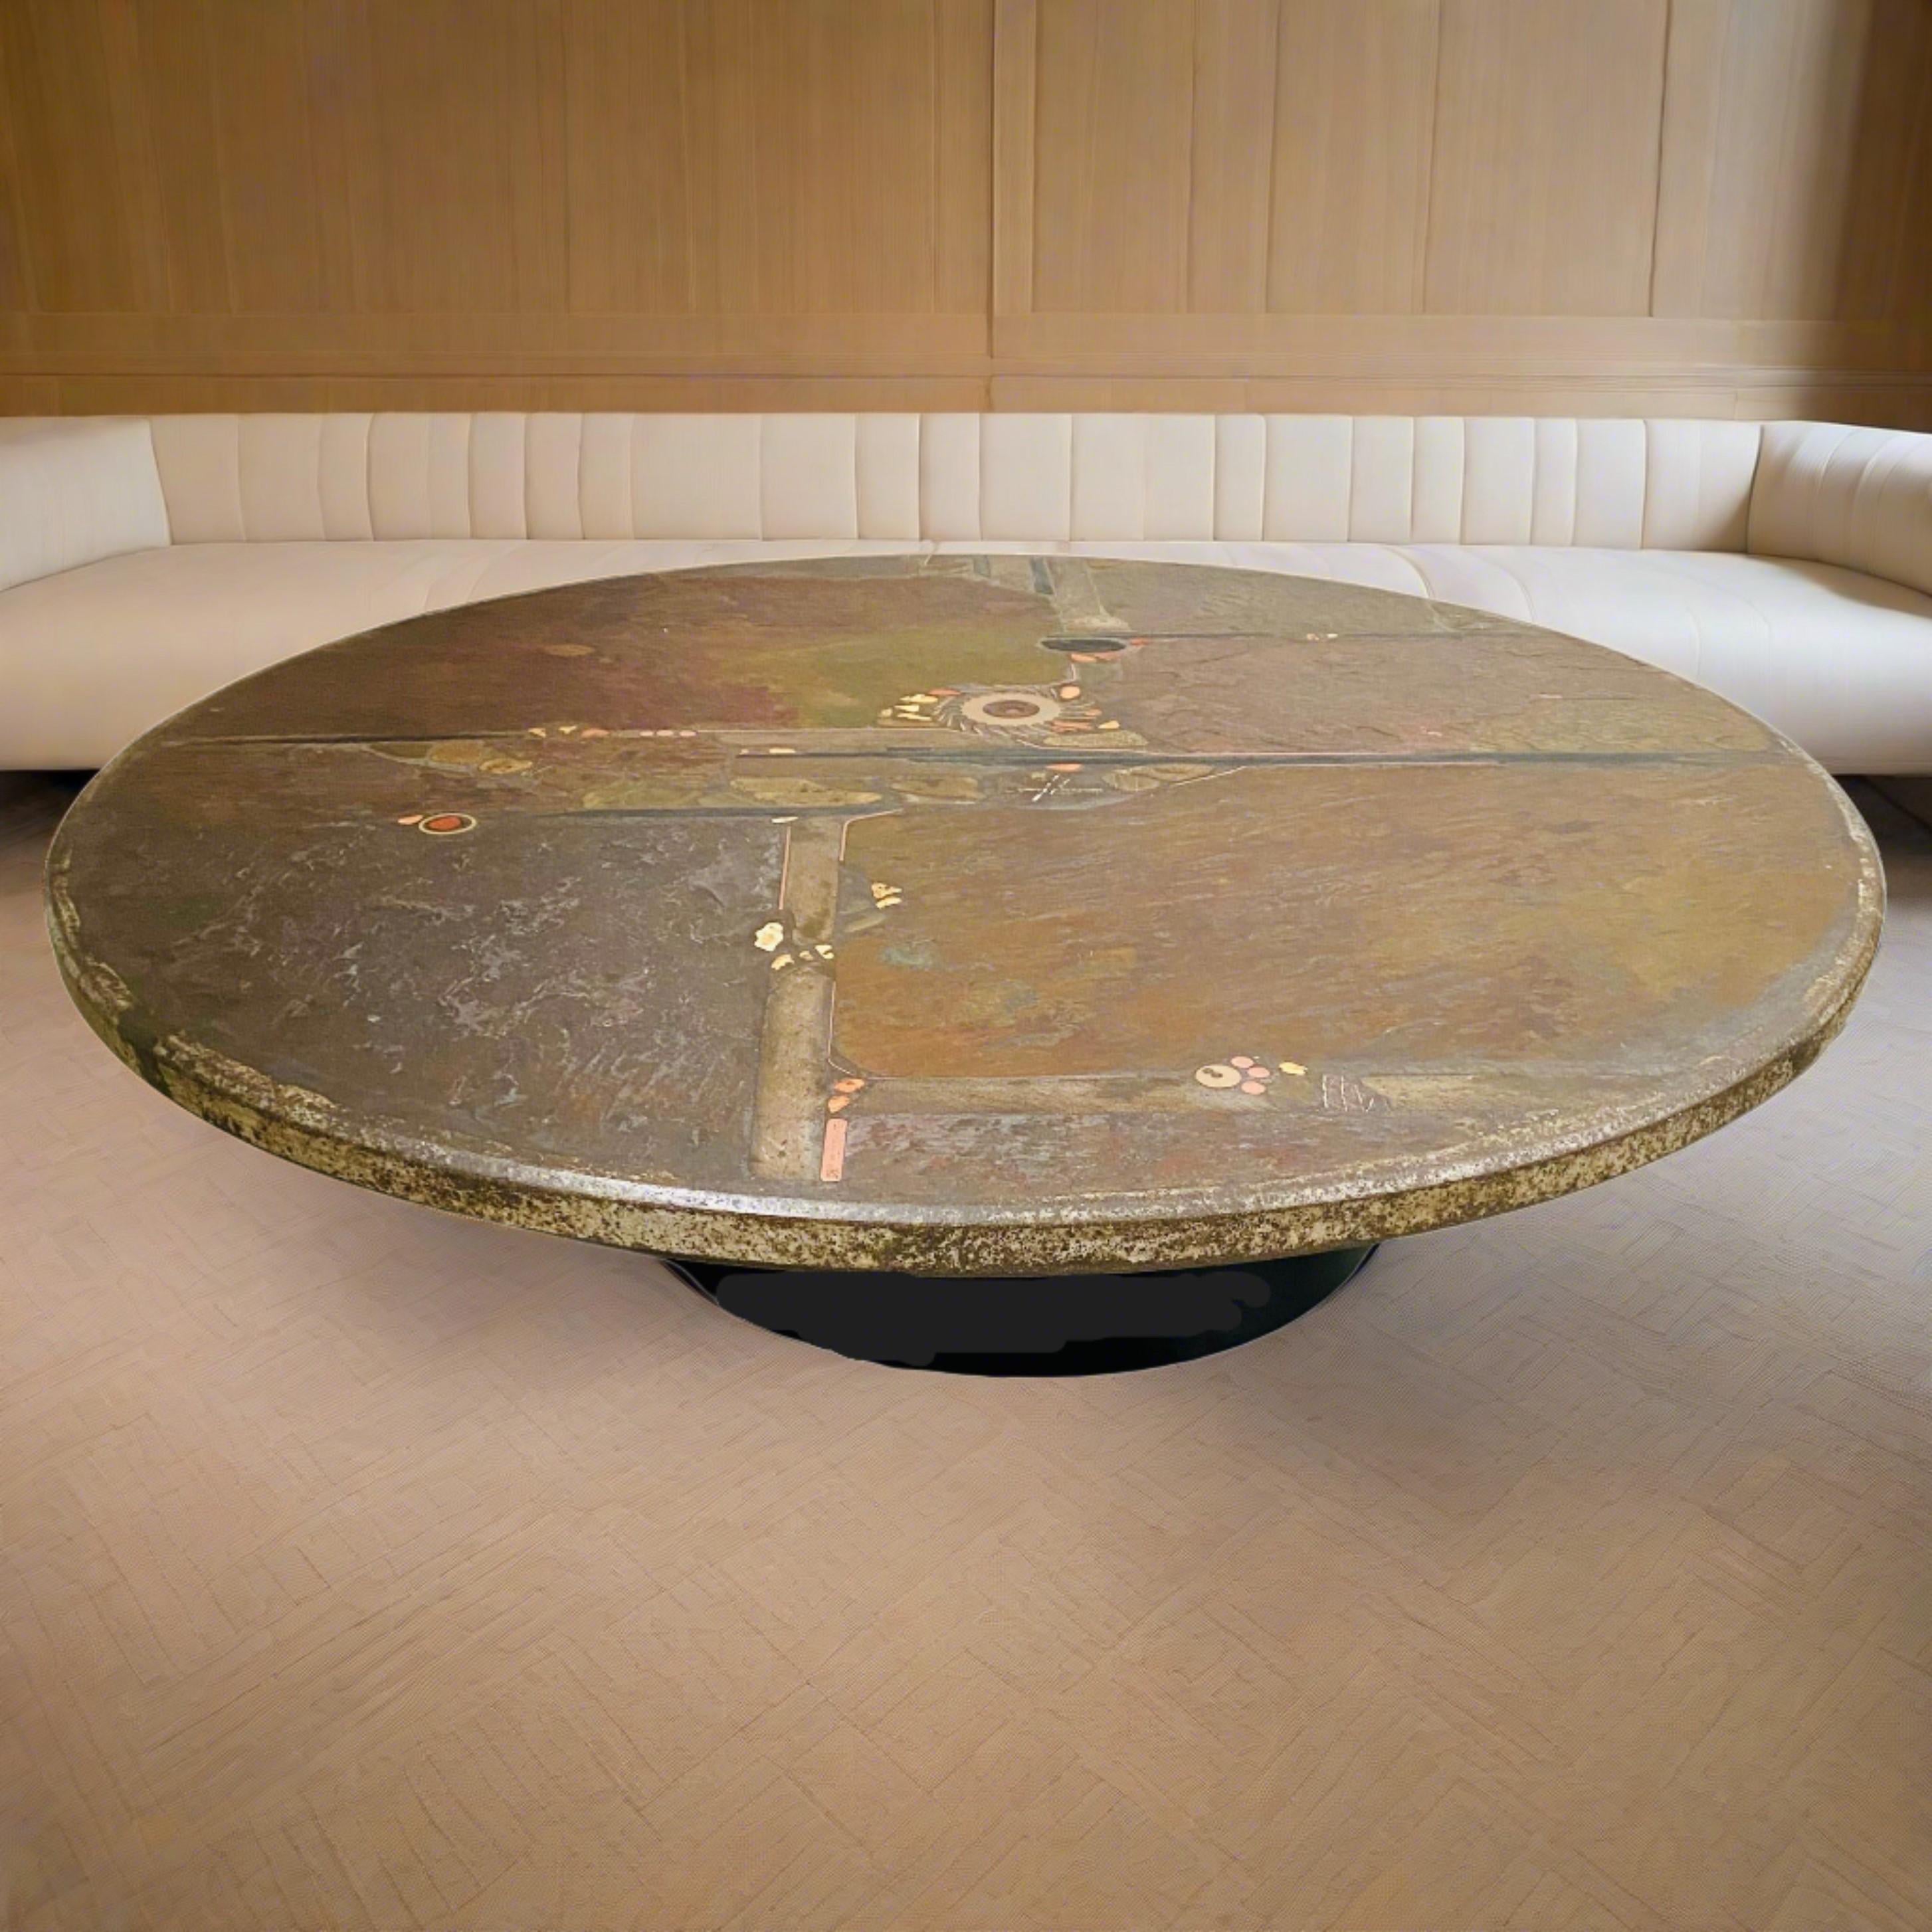 Late 20th Century Brutalist Art Stone Round Coffee Table by Sculptor Paul Kingma Netherlands, 1985 For Sale